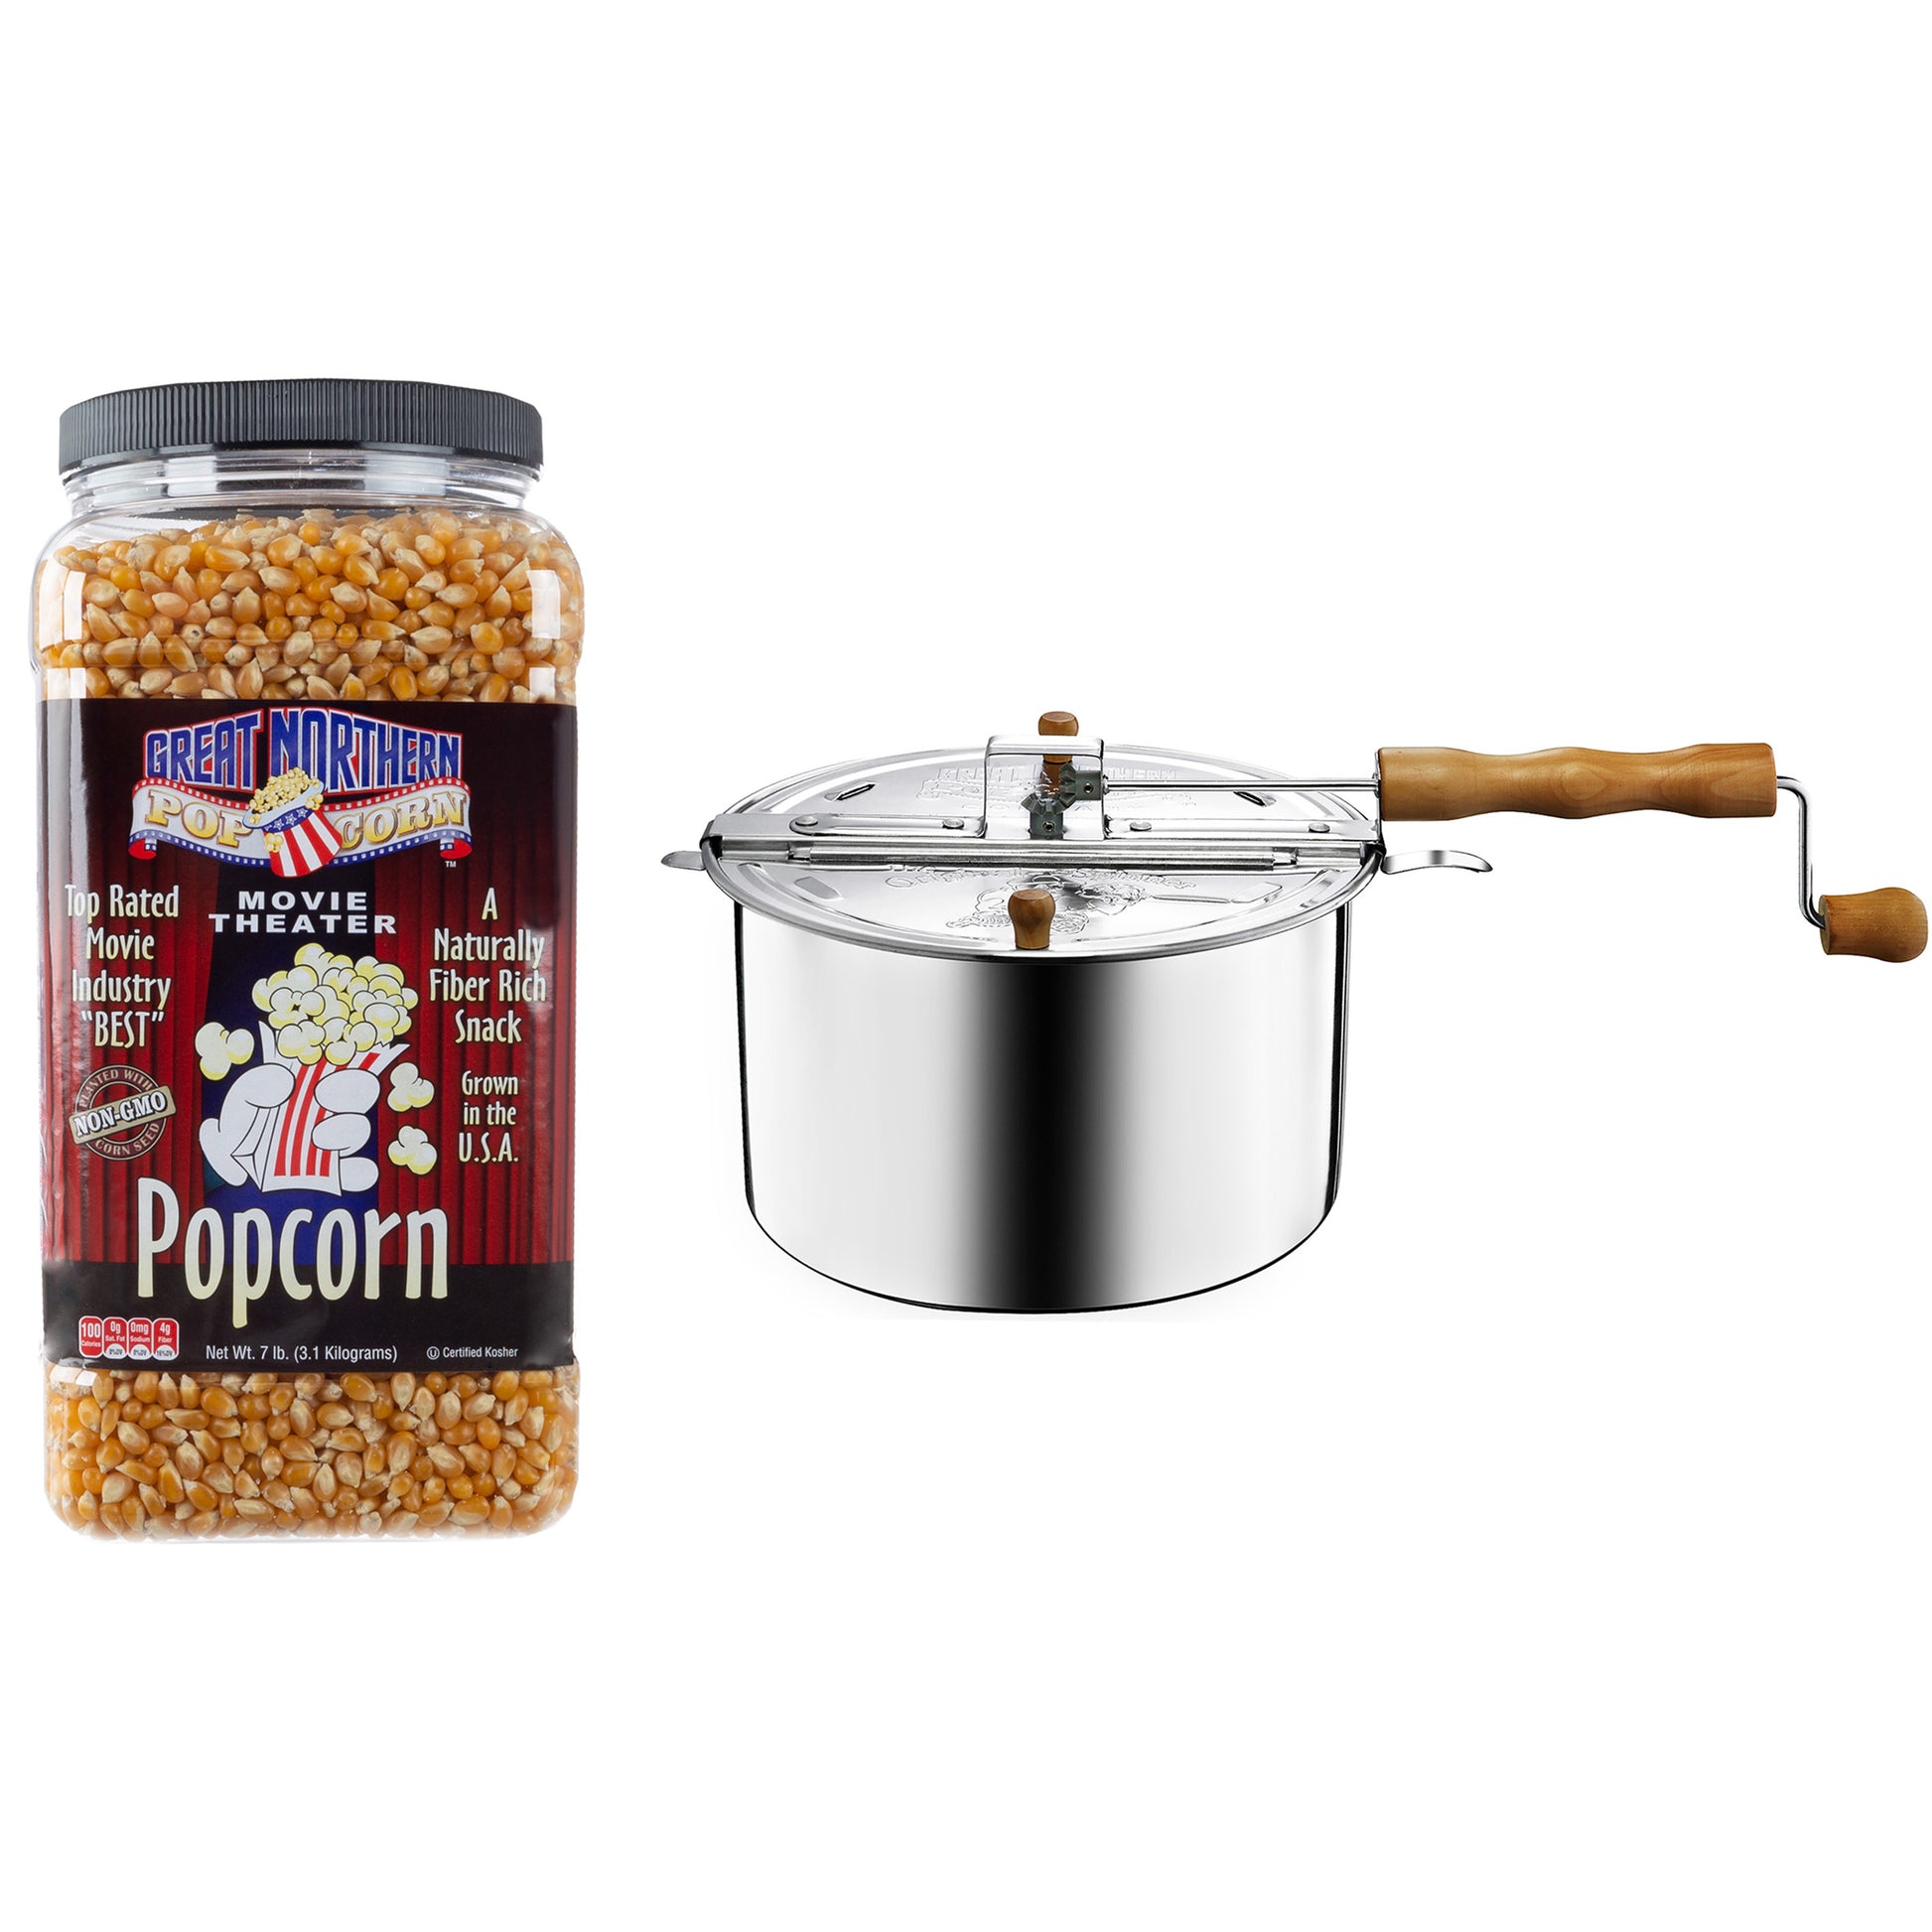 Great Northern 2-Piece Stainless-Steel Serving Accessories Kit, Popcorn Scoop and Seasoning Shaker Set